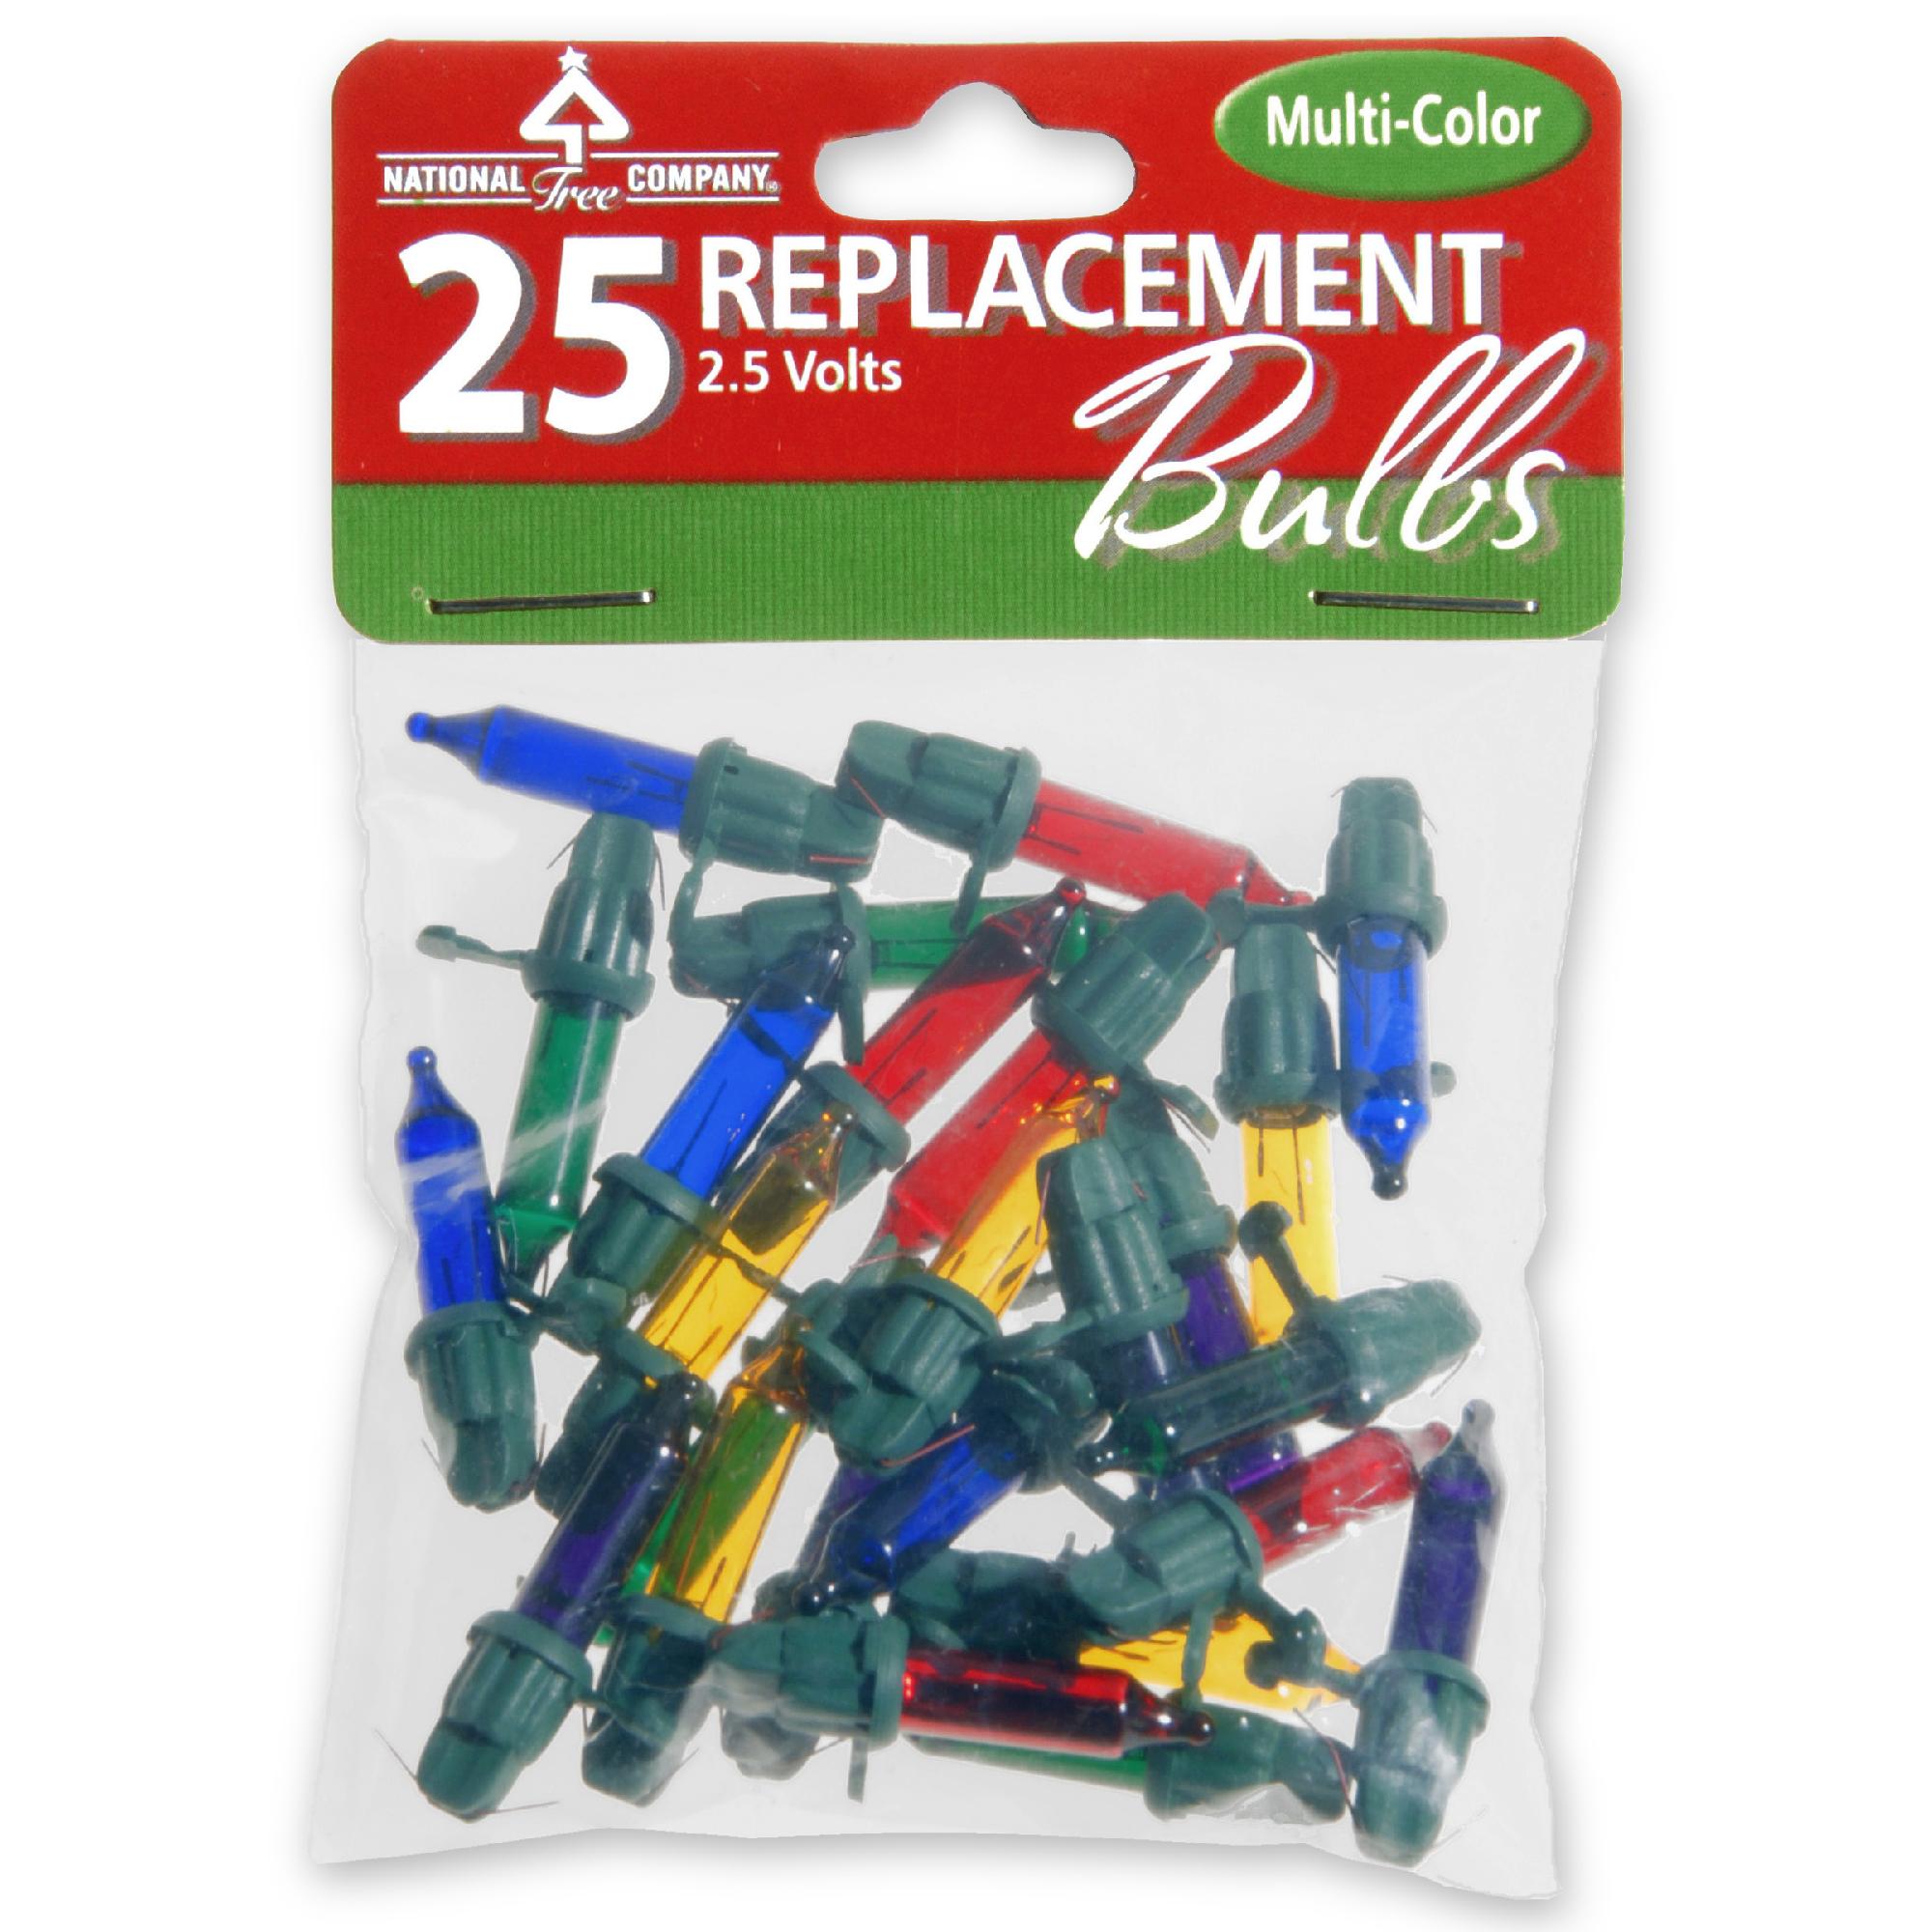 National Tree Company Replacement Bulbs, 25 Multicolor